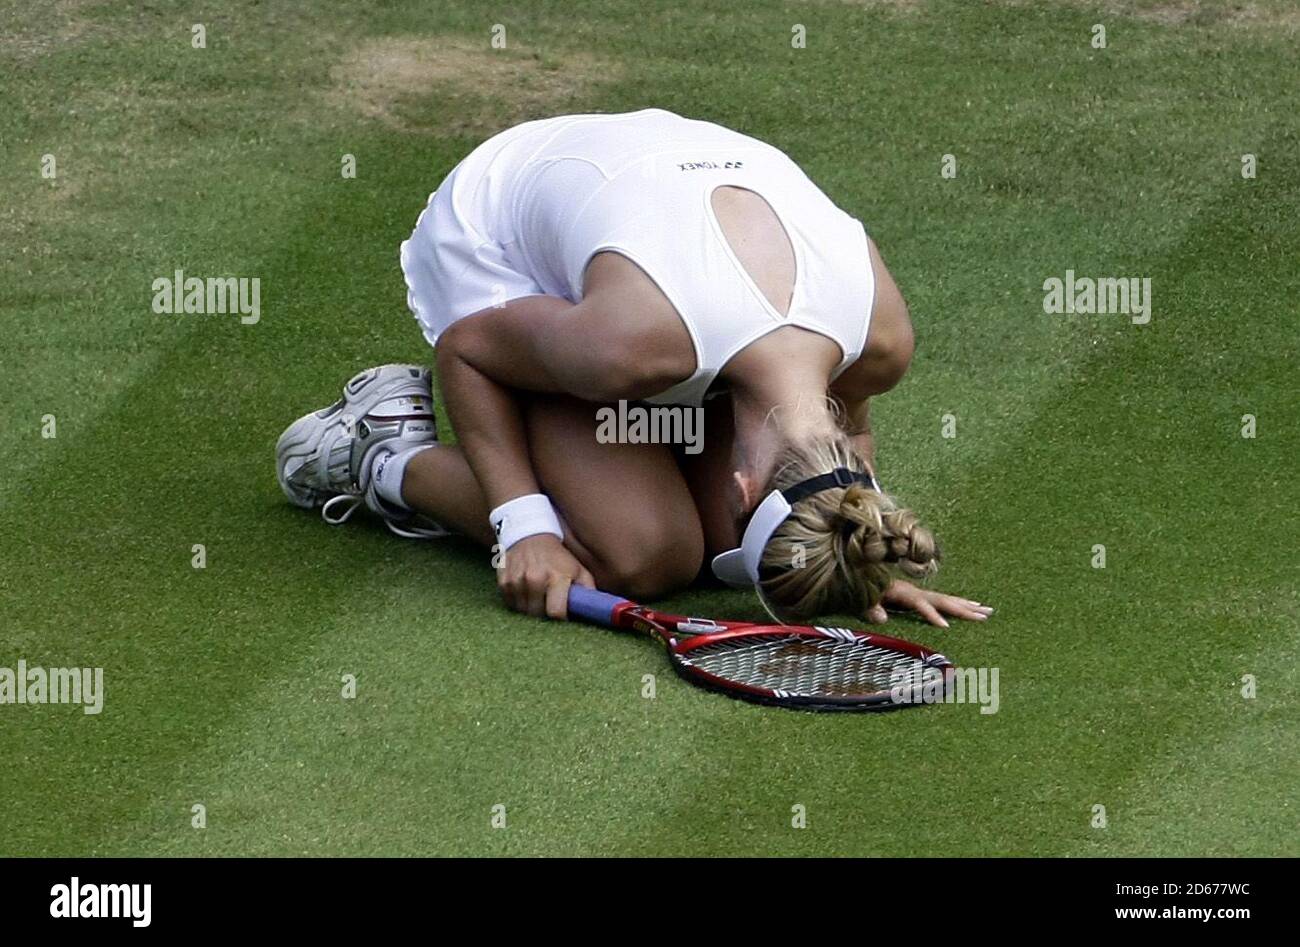 Russia's Elena Dementieva ends up on the floor during her match against USA's Serena Williams Stock Photo